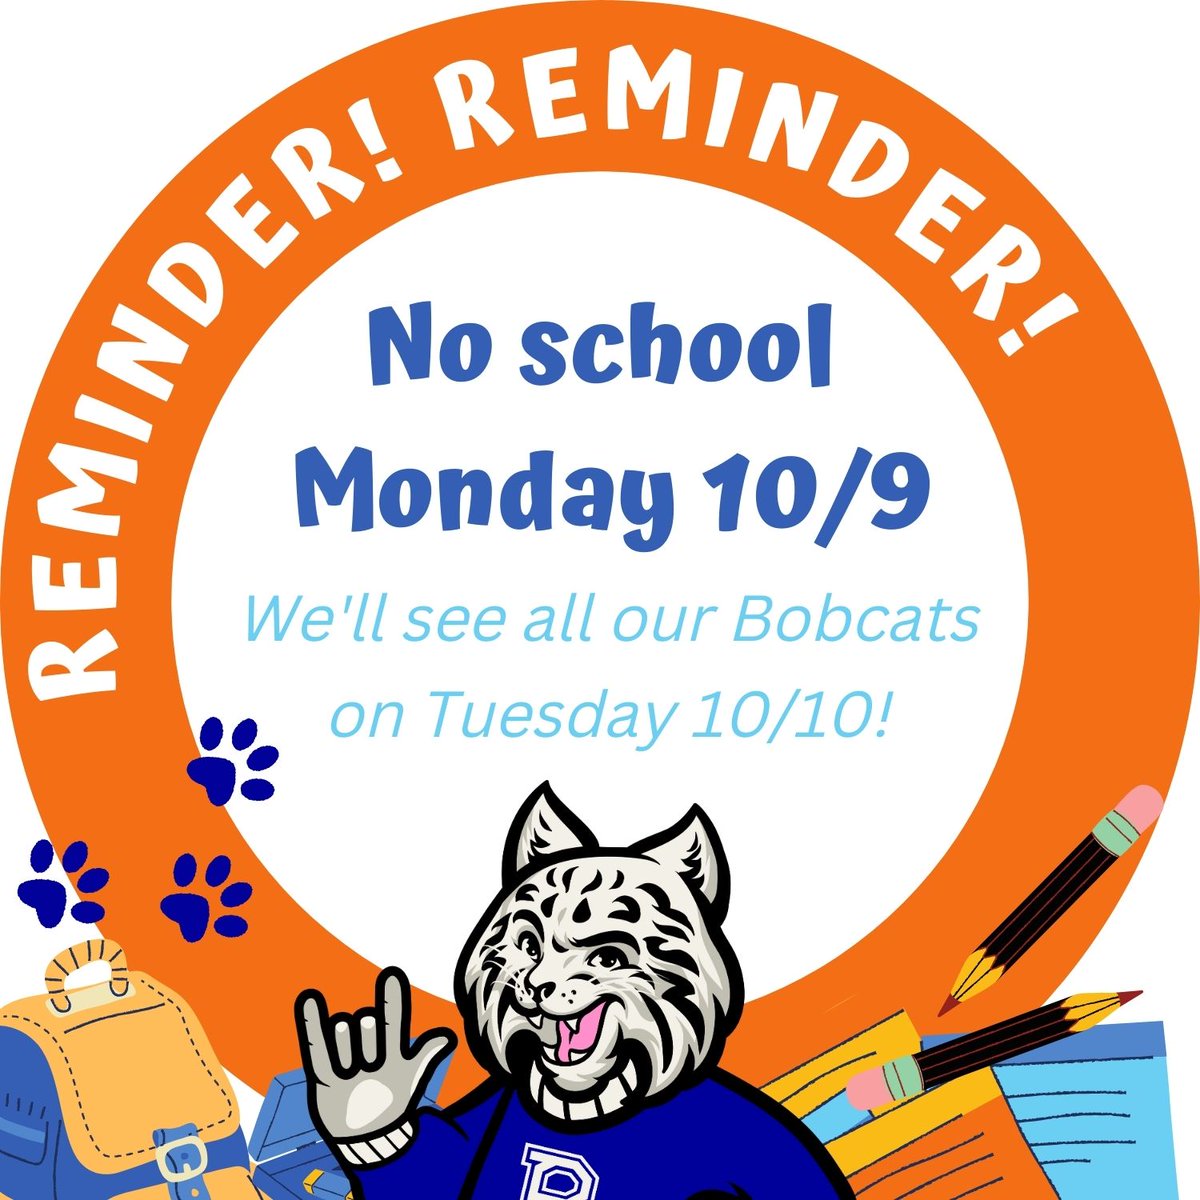 Friendly reminder that there is no school on Monday, October 9th. We will see our Bobcats on Tuesday, October 10th 😊